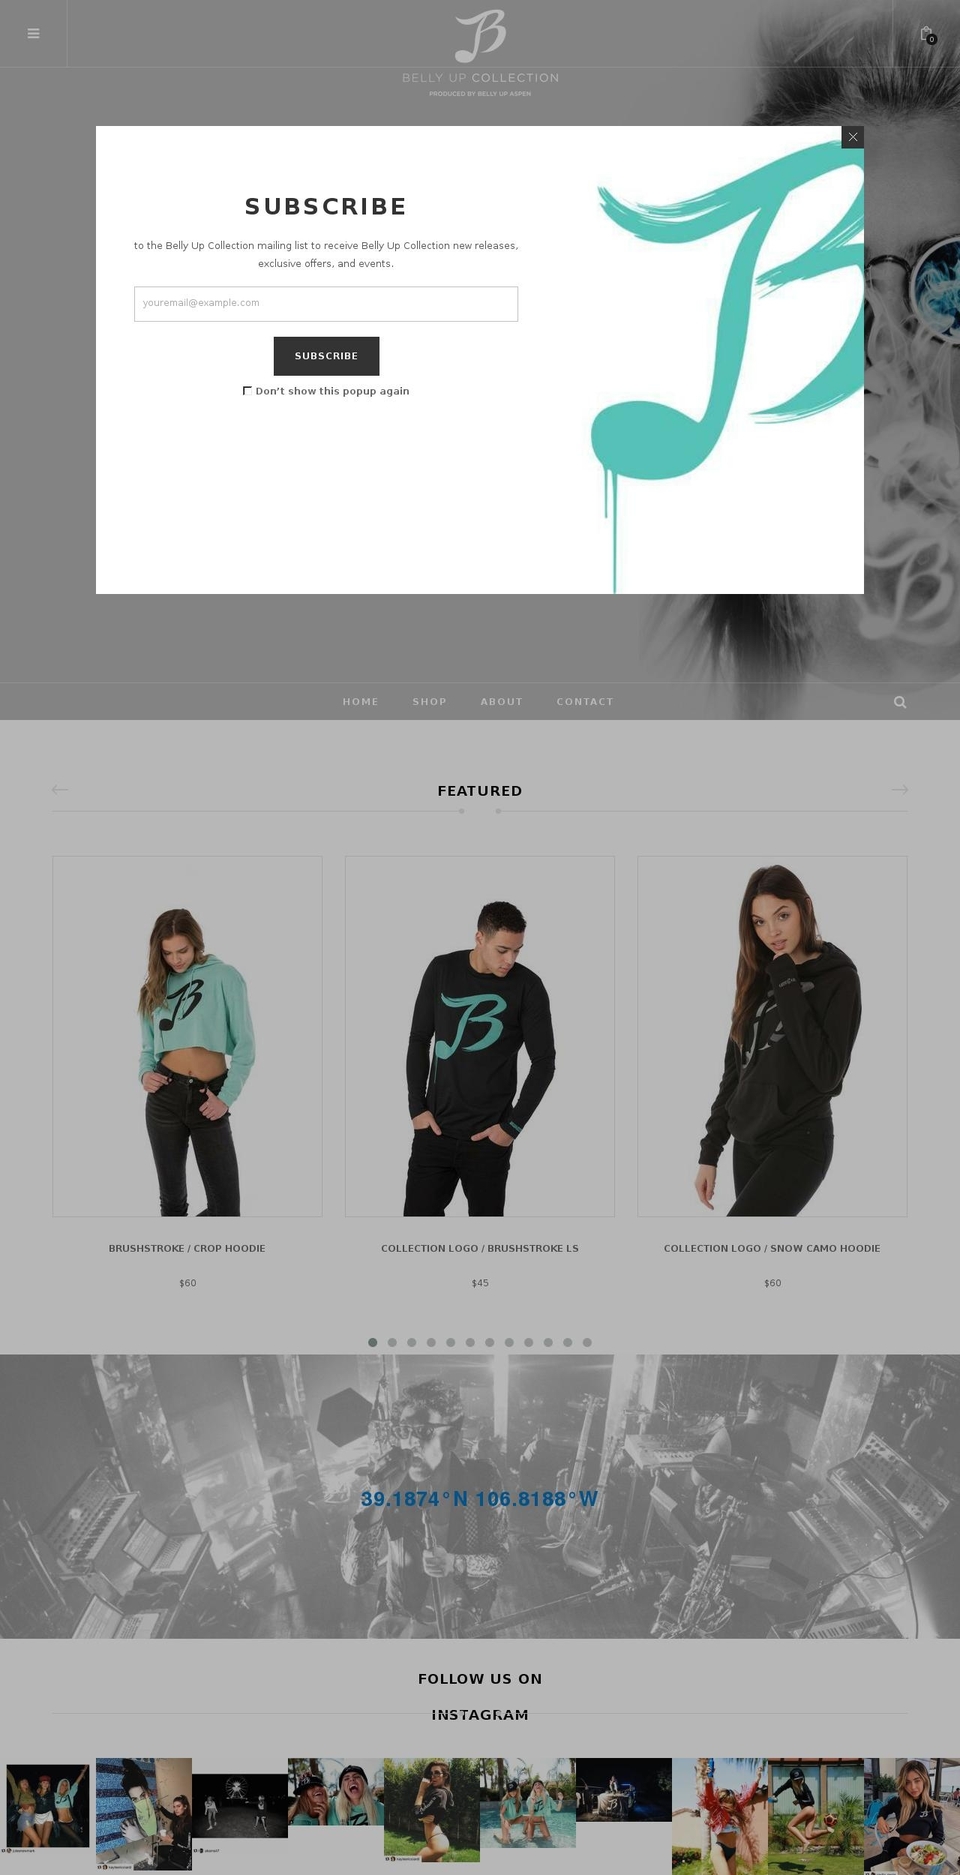 Puro Shopify theme site example bellyupcollection.com